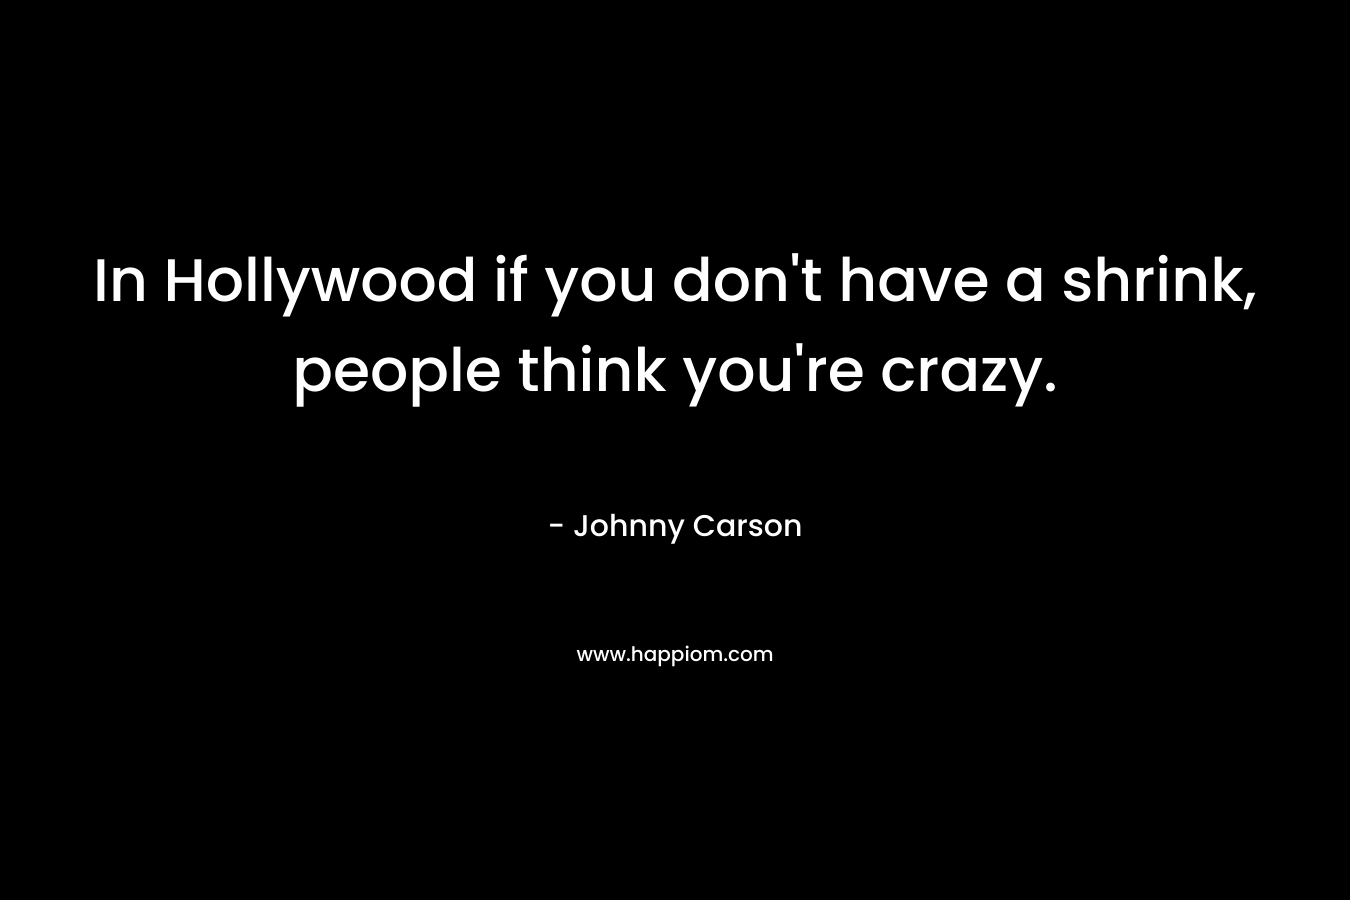 In Hollywood if you don’t have a shrink, people think you’re crazy. – Johnny Carson